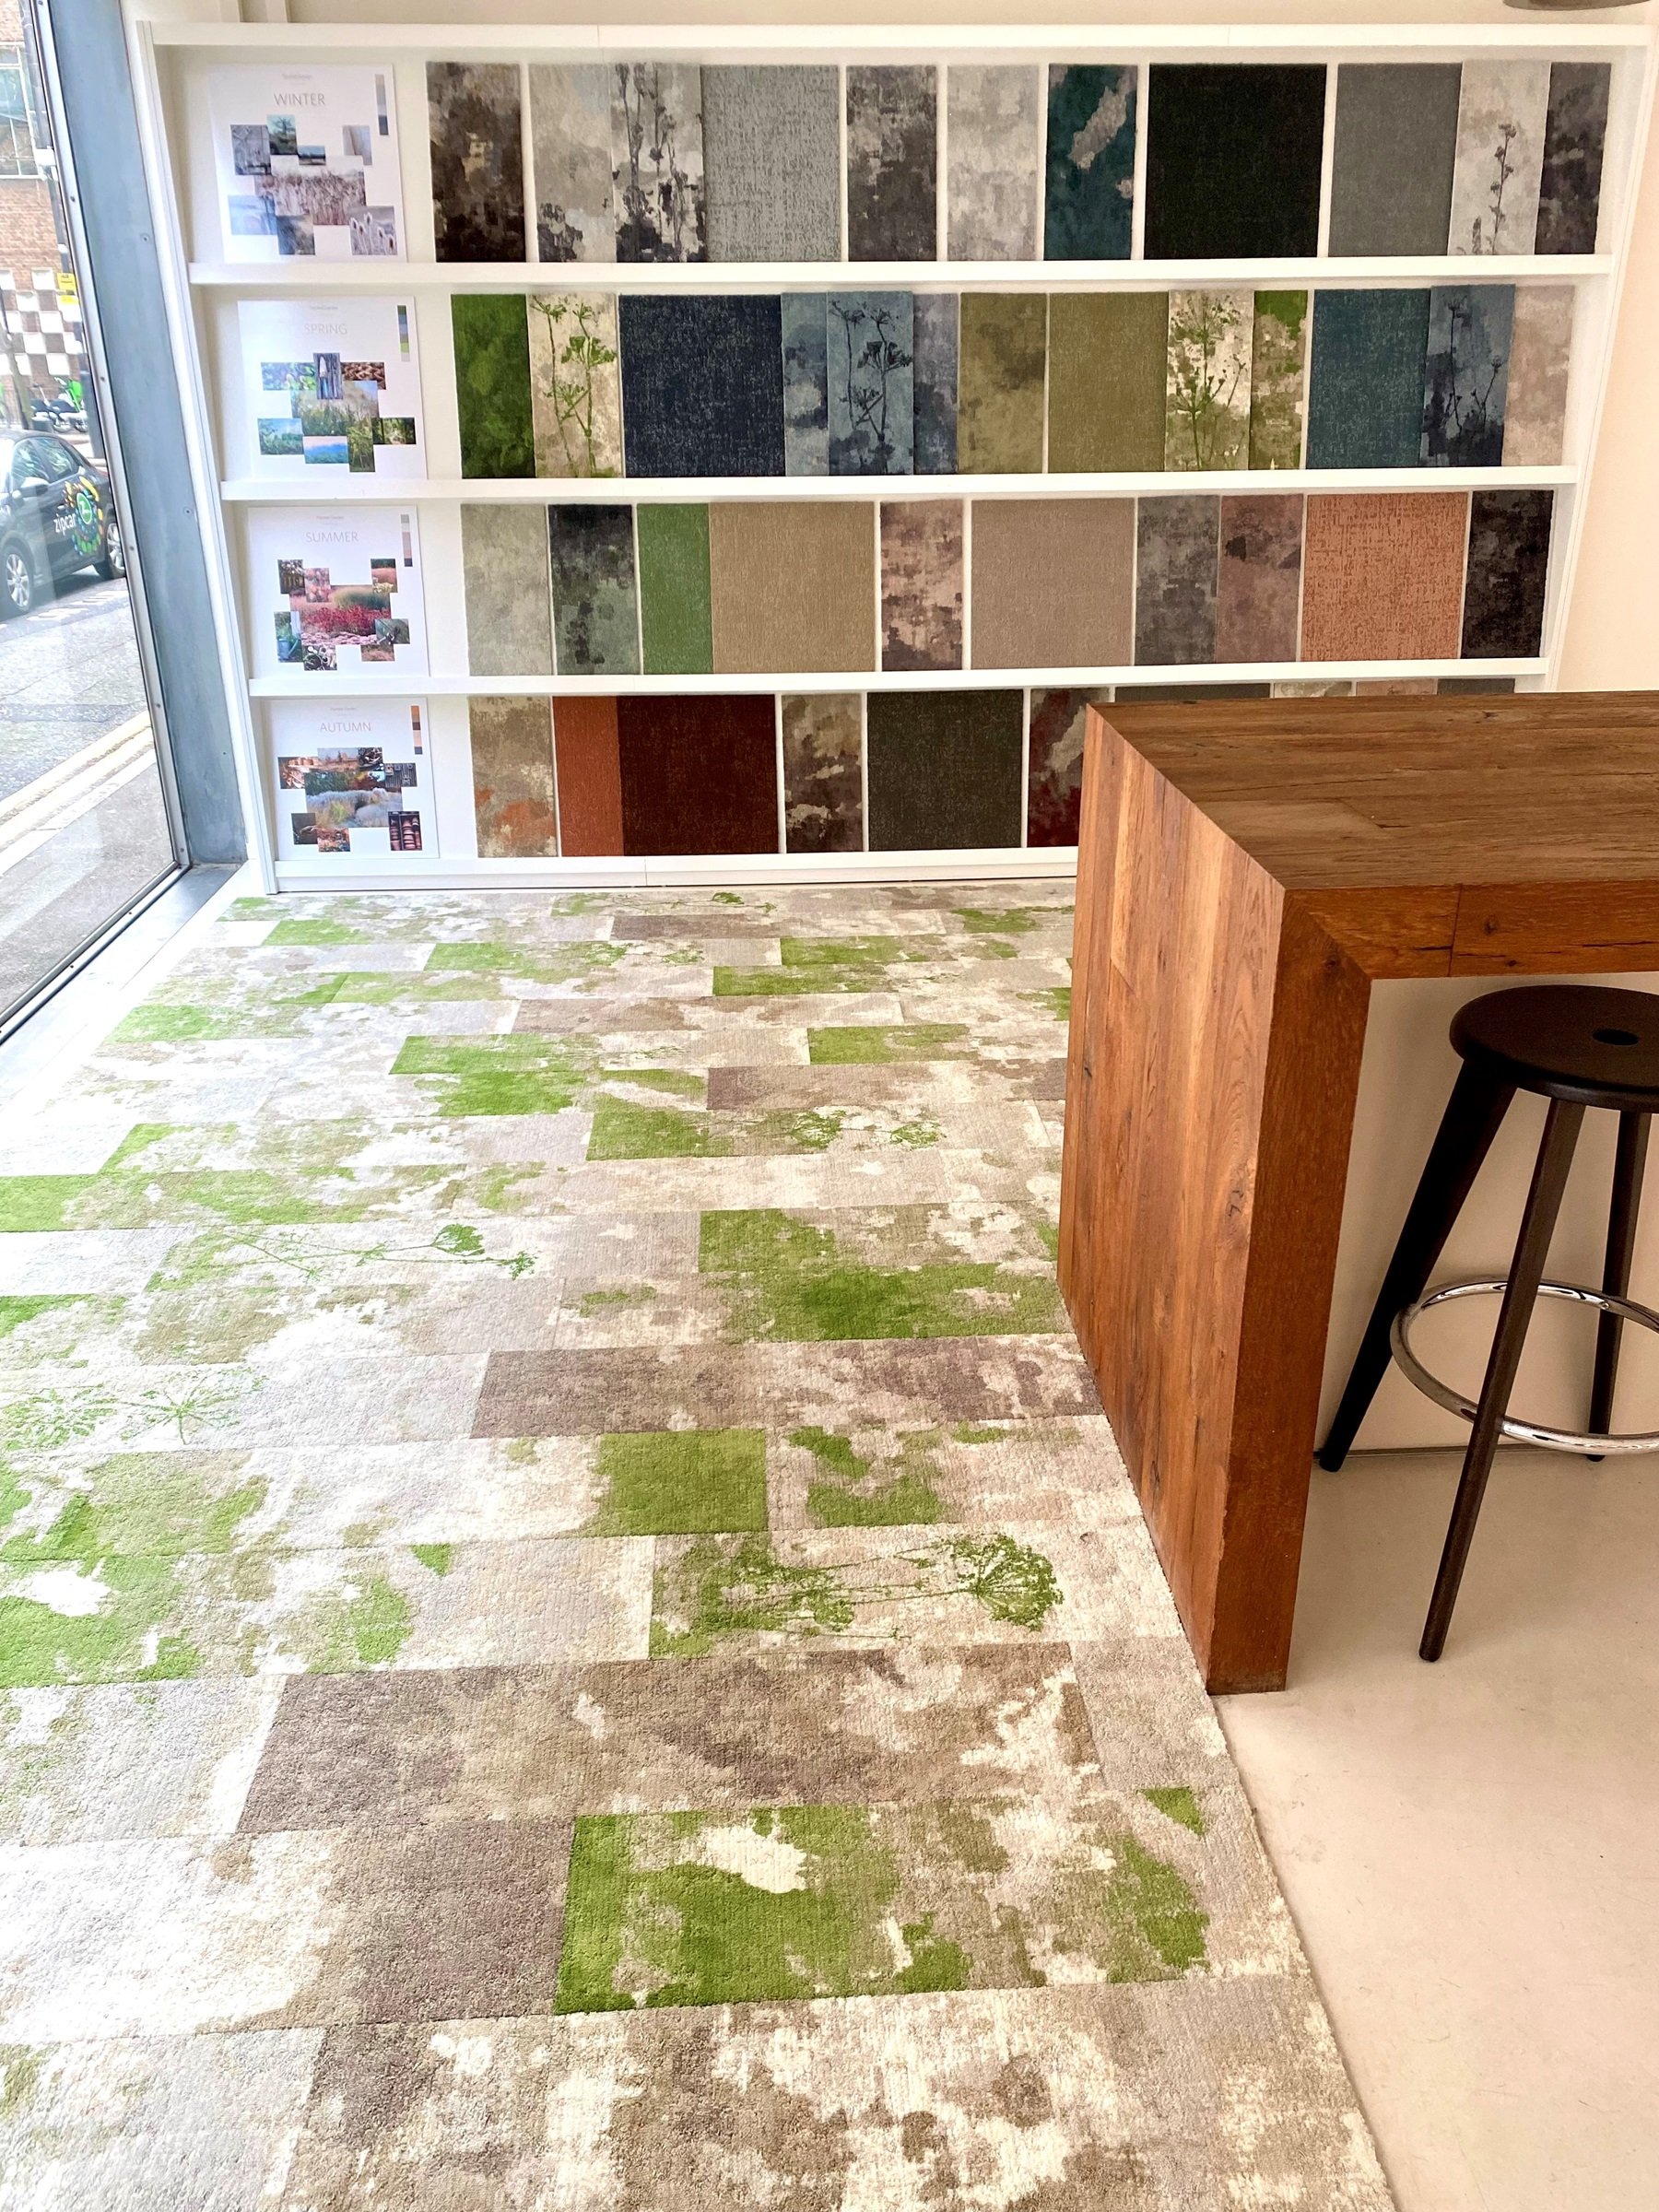 Milliken's London showroom with coloured carpet tiles with nature motifs